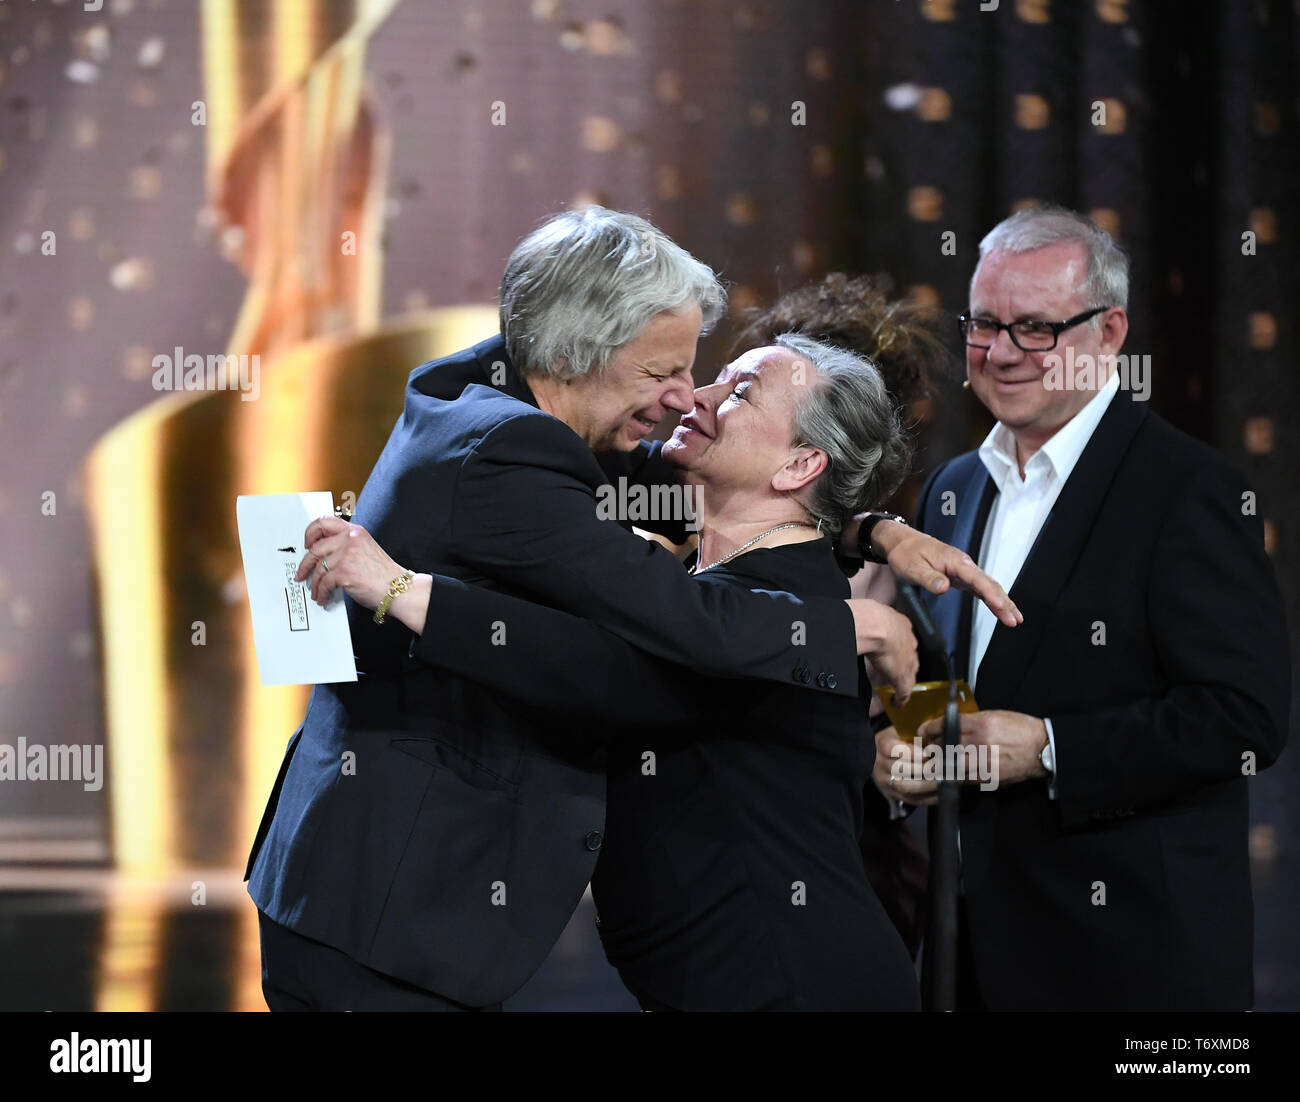 Berlin, Germany. 03rd May, 2019. Director Andreas Dresen (l, film 'Gundermann') is awarded the 69th German Film Prize 'Lola' in the category 'Best Director' by Ursula Werner (M), backed by Joachim Krol (r). Credit: Britta Pedersen/dpa-Zentralbild/dpa/Alamy Live News Stock Photo